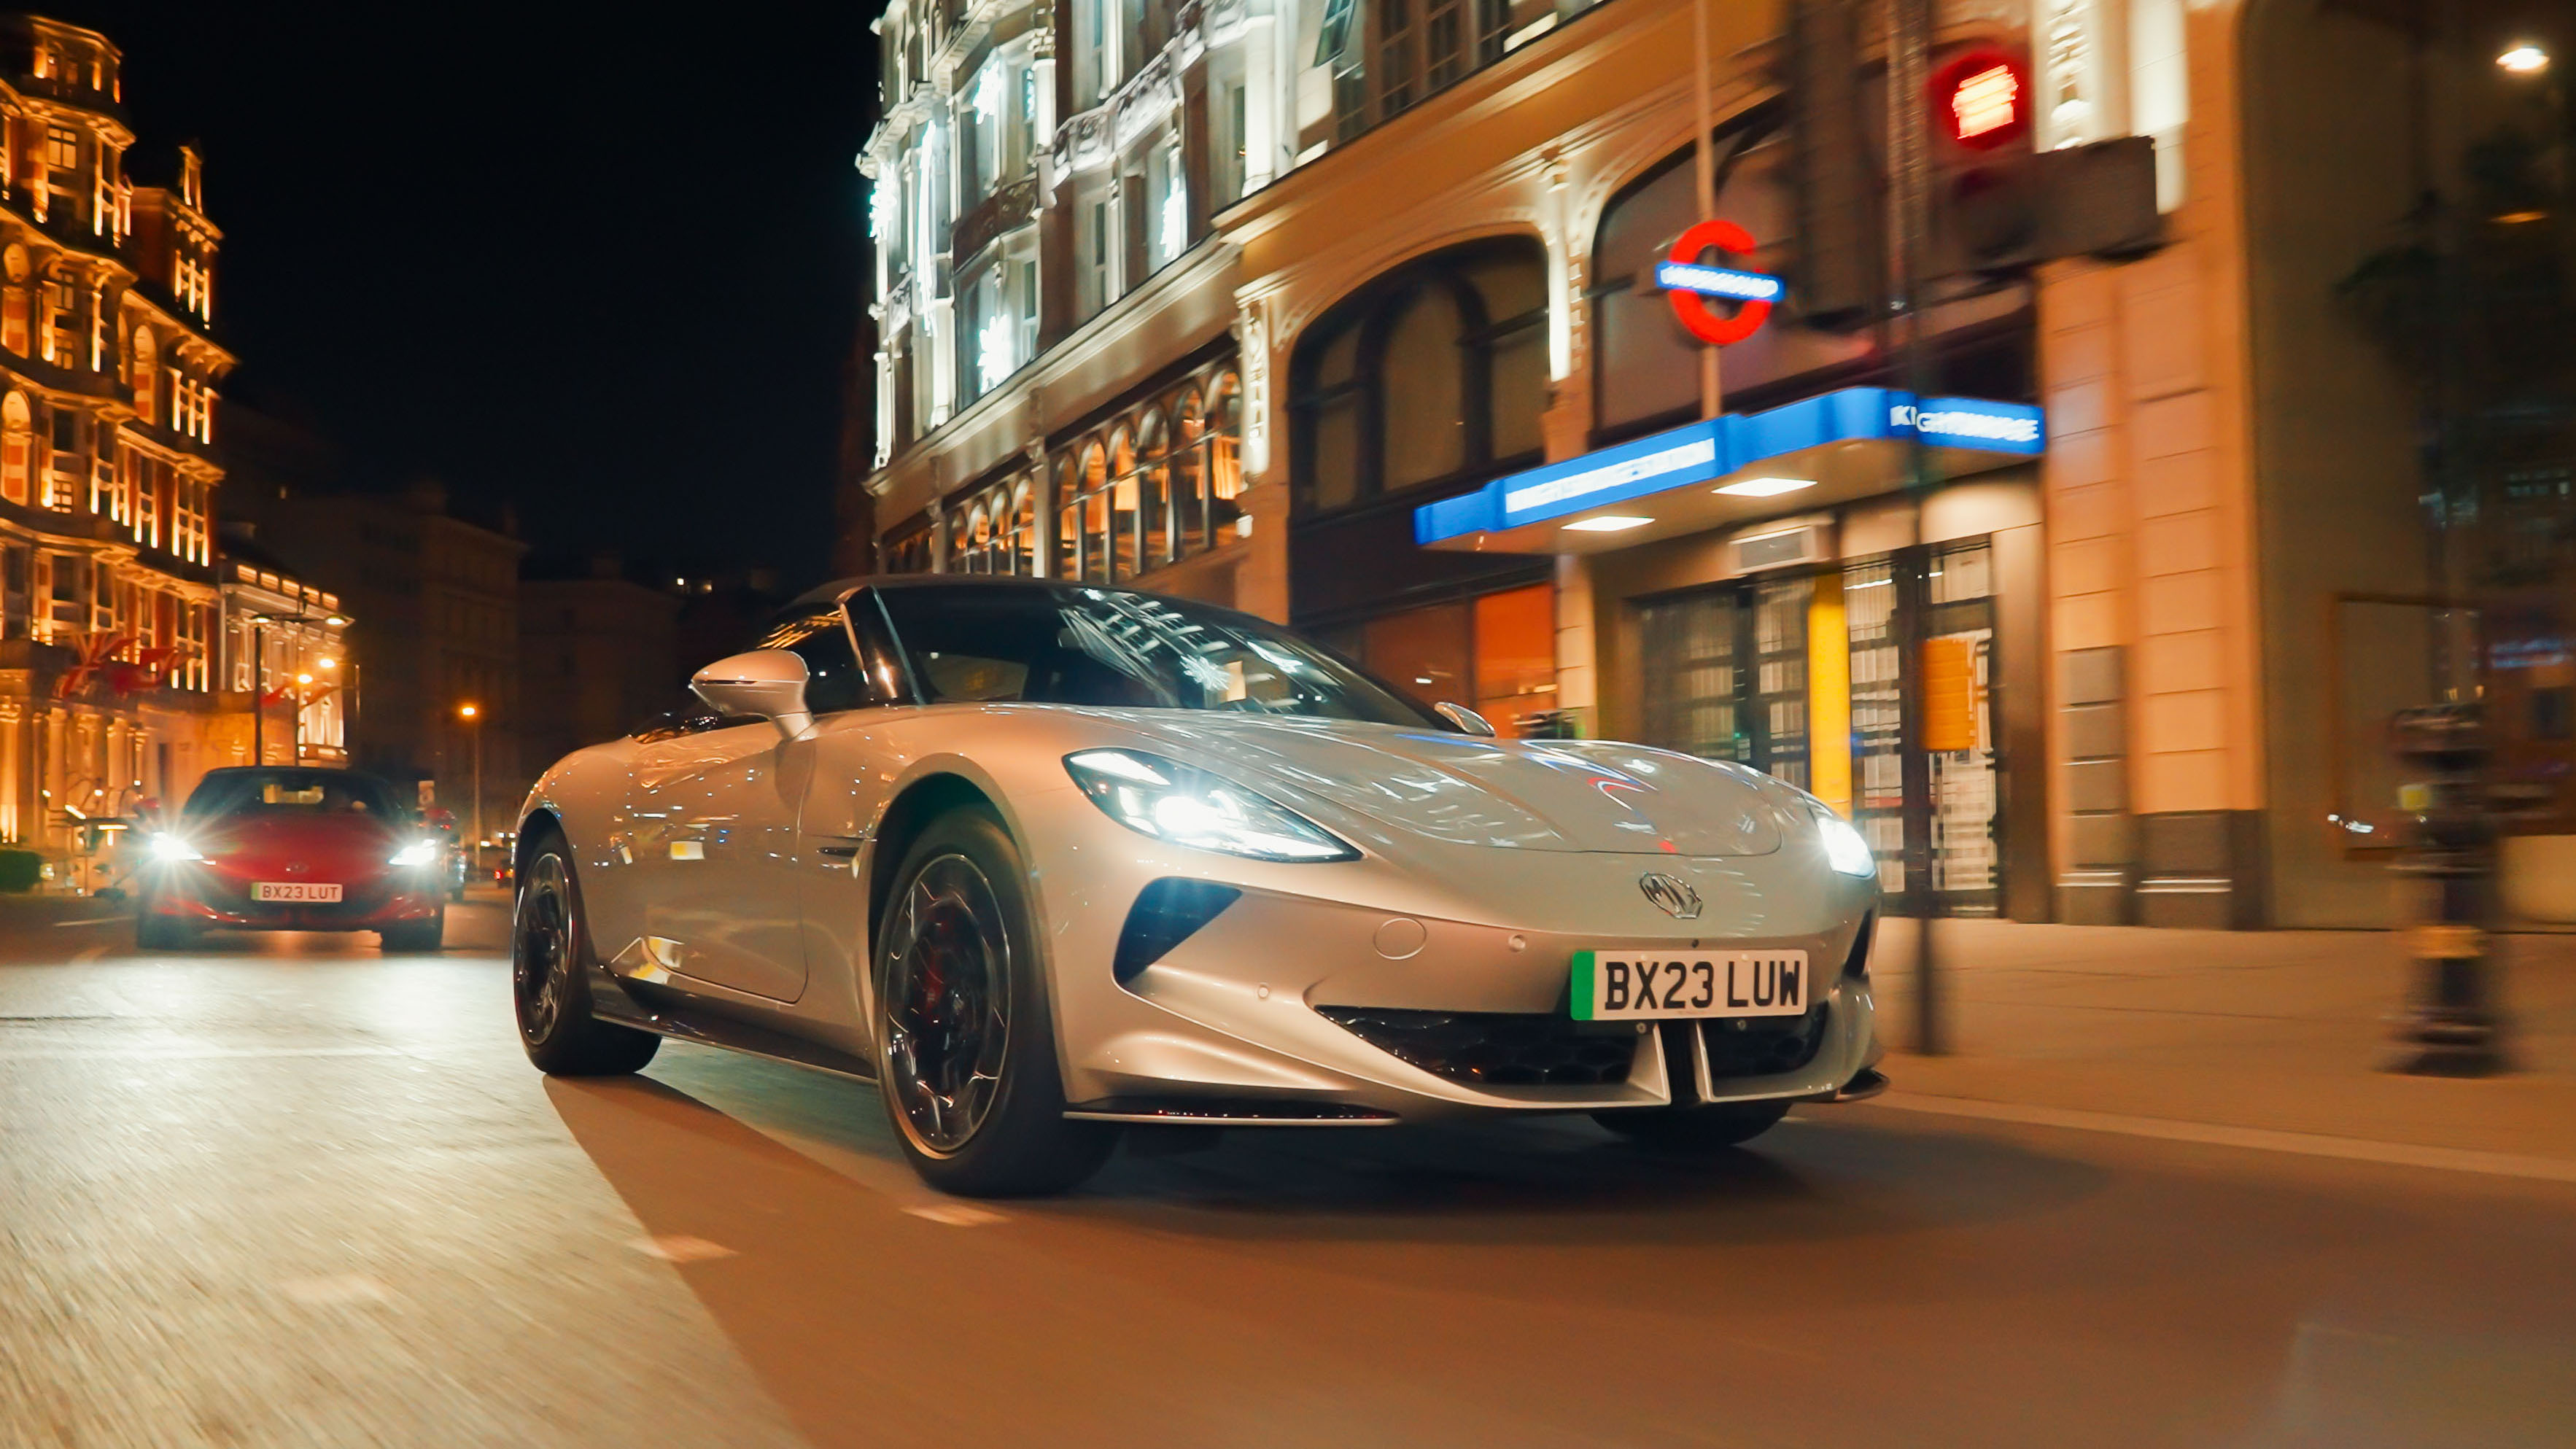 the mg cyberster all-electric sports car will start at £54,995